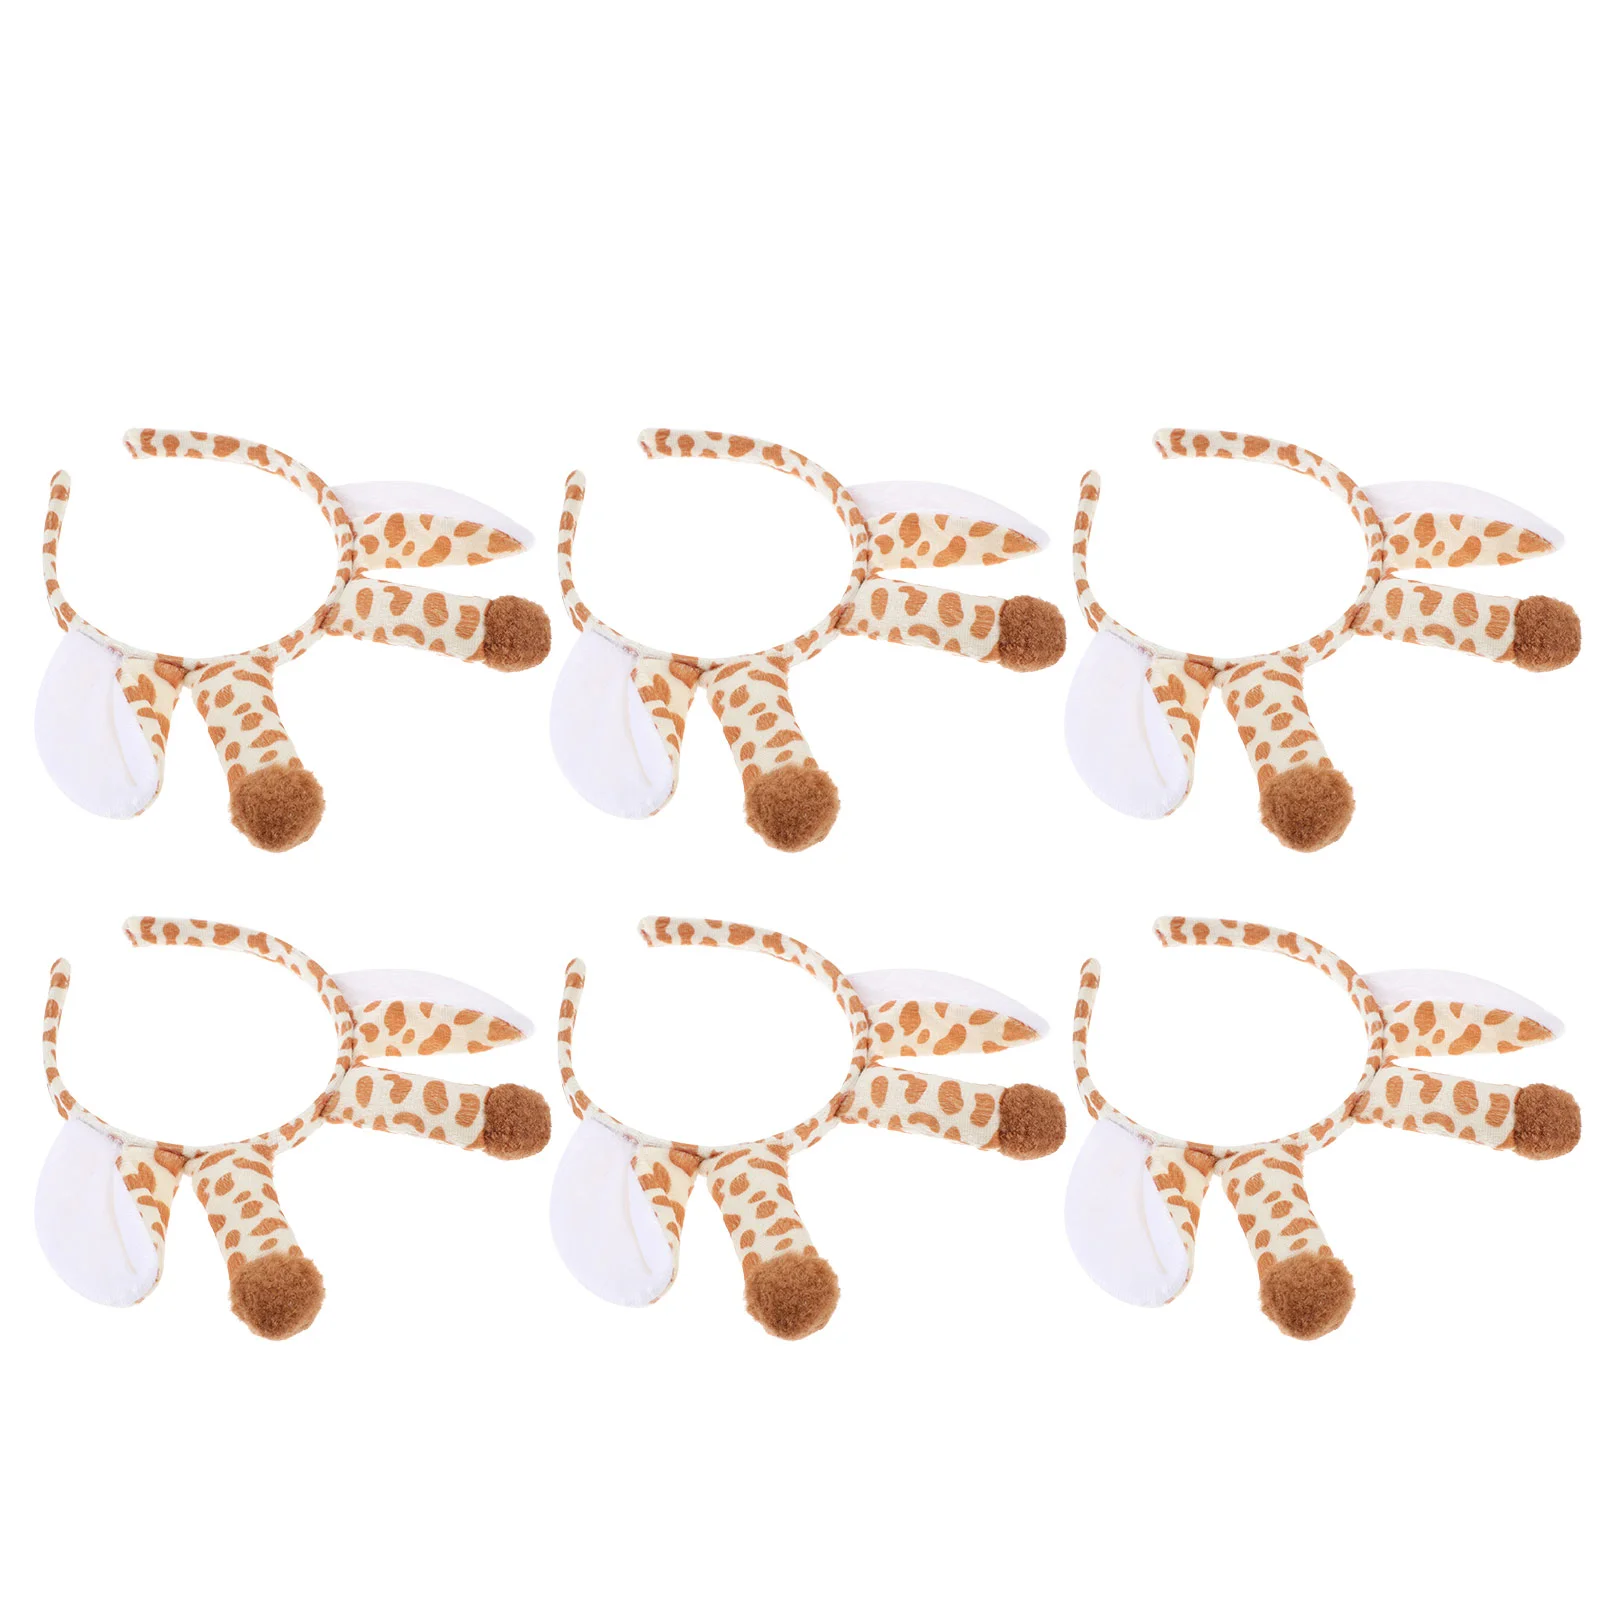 6 Pcs Animal Headband Lovely Hair Wear Decorate Christmas Party Hoops Accessories Girls Headdress Cloth for Kids Miss new music retro stage lighting 5x50w led retro flash dmx512 professional decorate portman party bar stage lamp dj lights disco